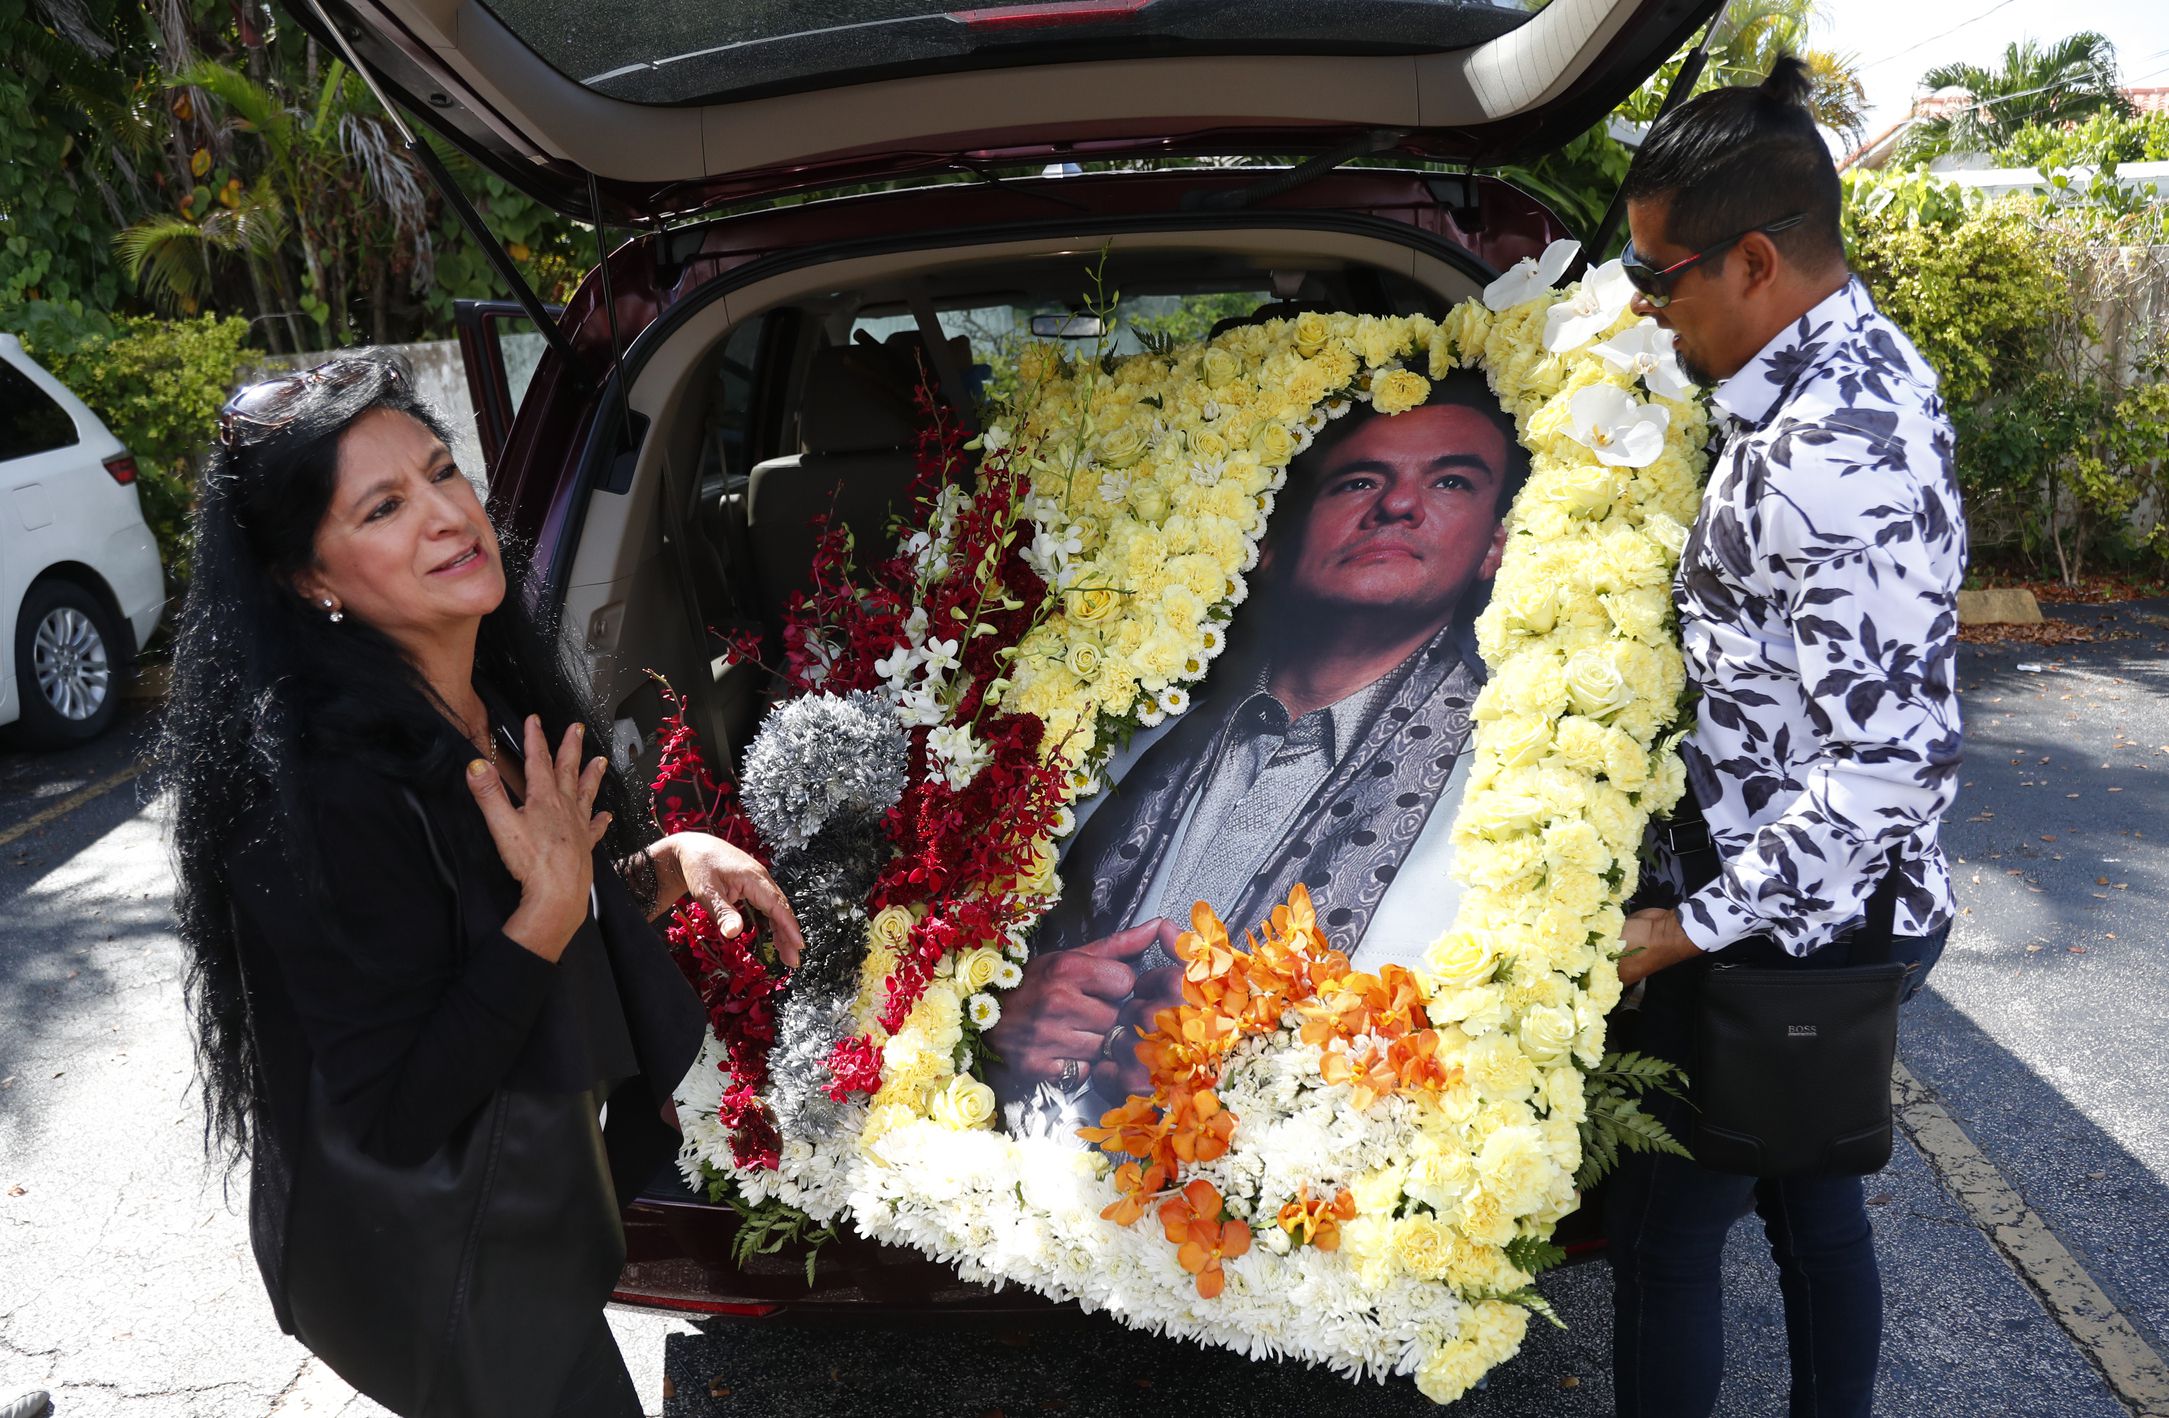 Angela Paise, left, and Luis Brito, who is known as "El Mago de las flores,"or "The flower magician," show off a flower arrangement they made and brought to the wake of the late Mexican singer Jose Jose, Friday, Oct. 4, 2019, in Miami. The singer, beloved for his melancholy ballads, died last Saturday in Miami at age 71. (AP Photo/Wilfredo Lee)